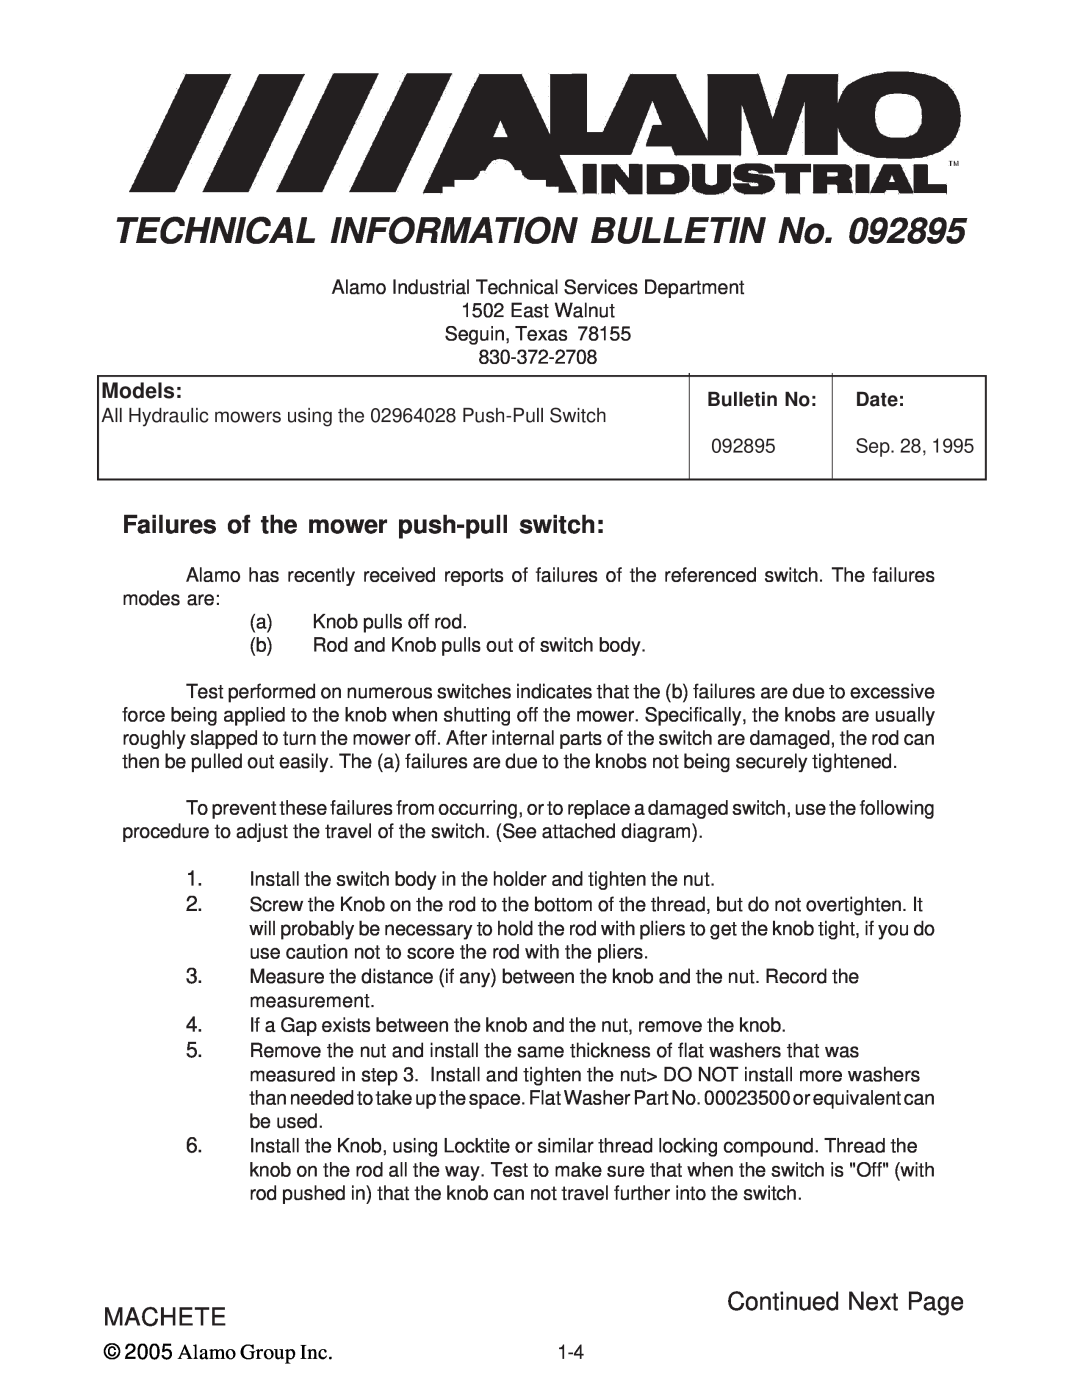 Alamo T 7740 Failures of the mower push-pullswitch, Continued Next Page, Models, TECHNICAL INFORMATION BULLETIN No, Date 